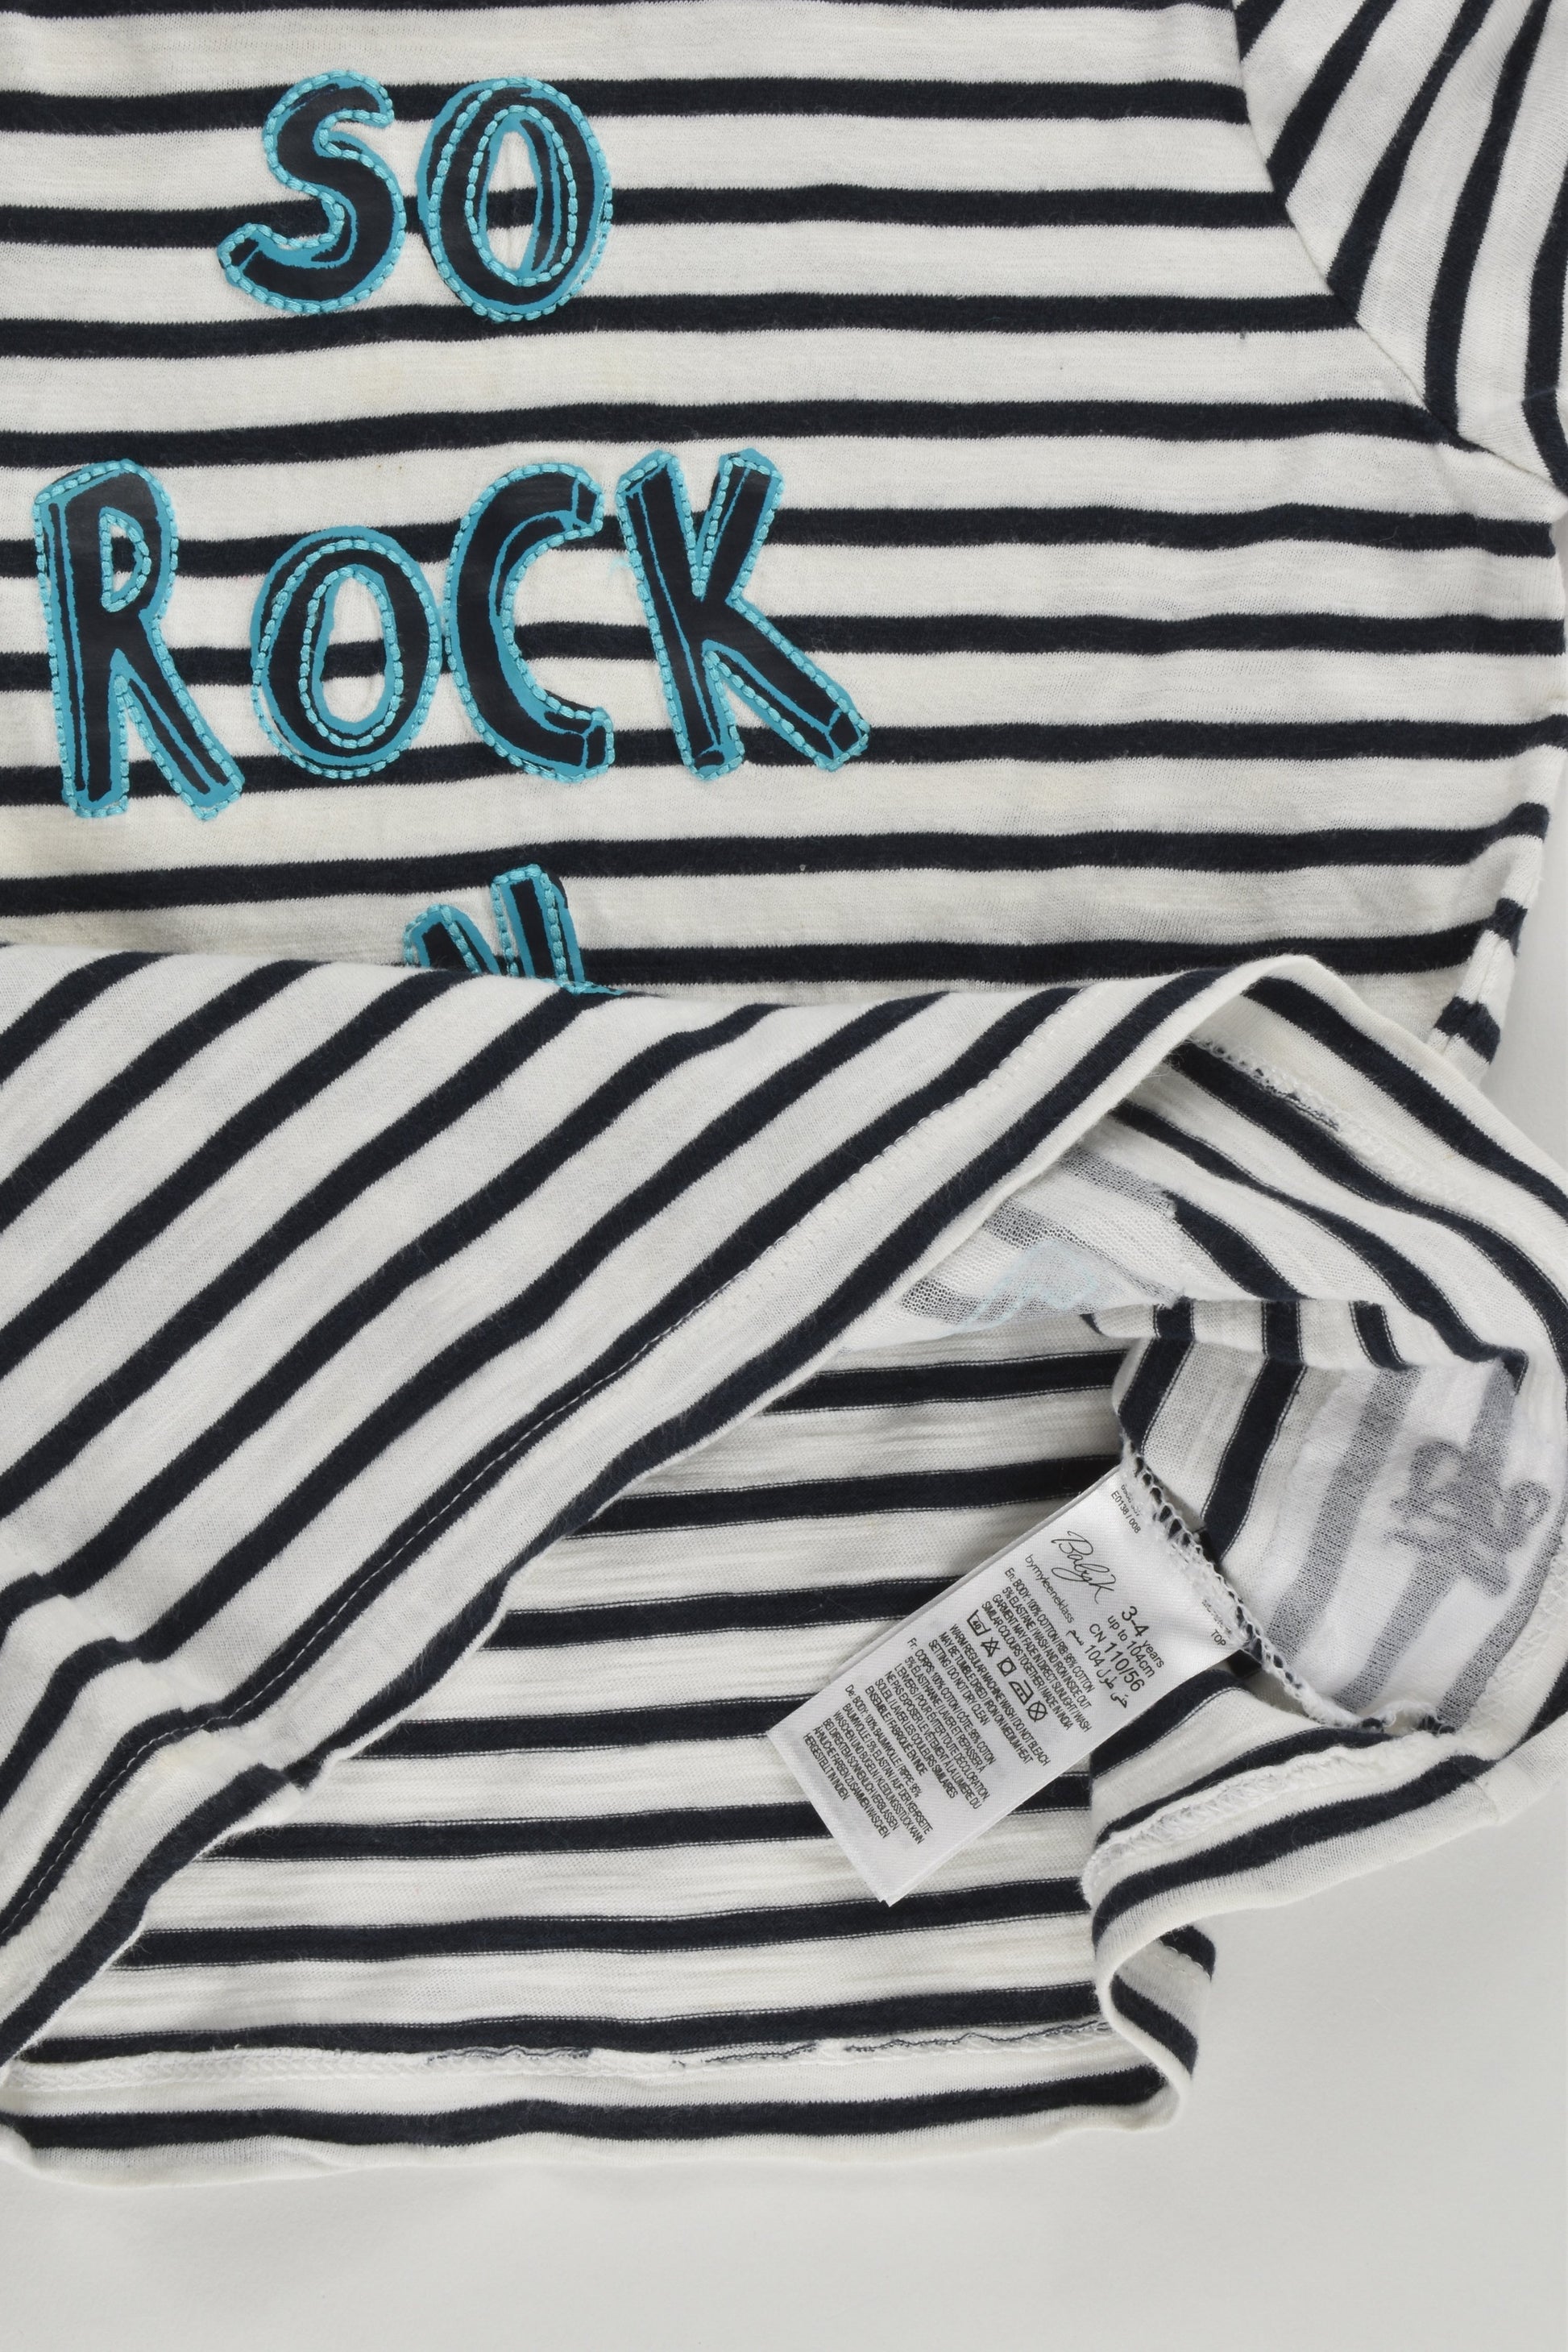 Baby K by Mothercare Size 3-4 (104 cm) 'So Rock N Roll' T-shirt